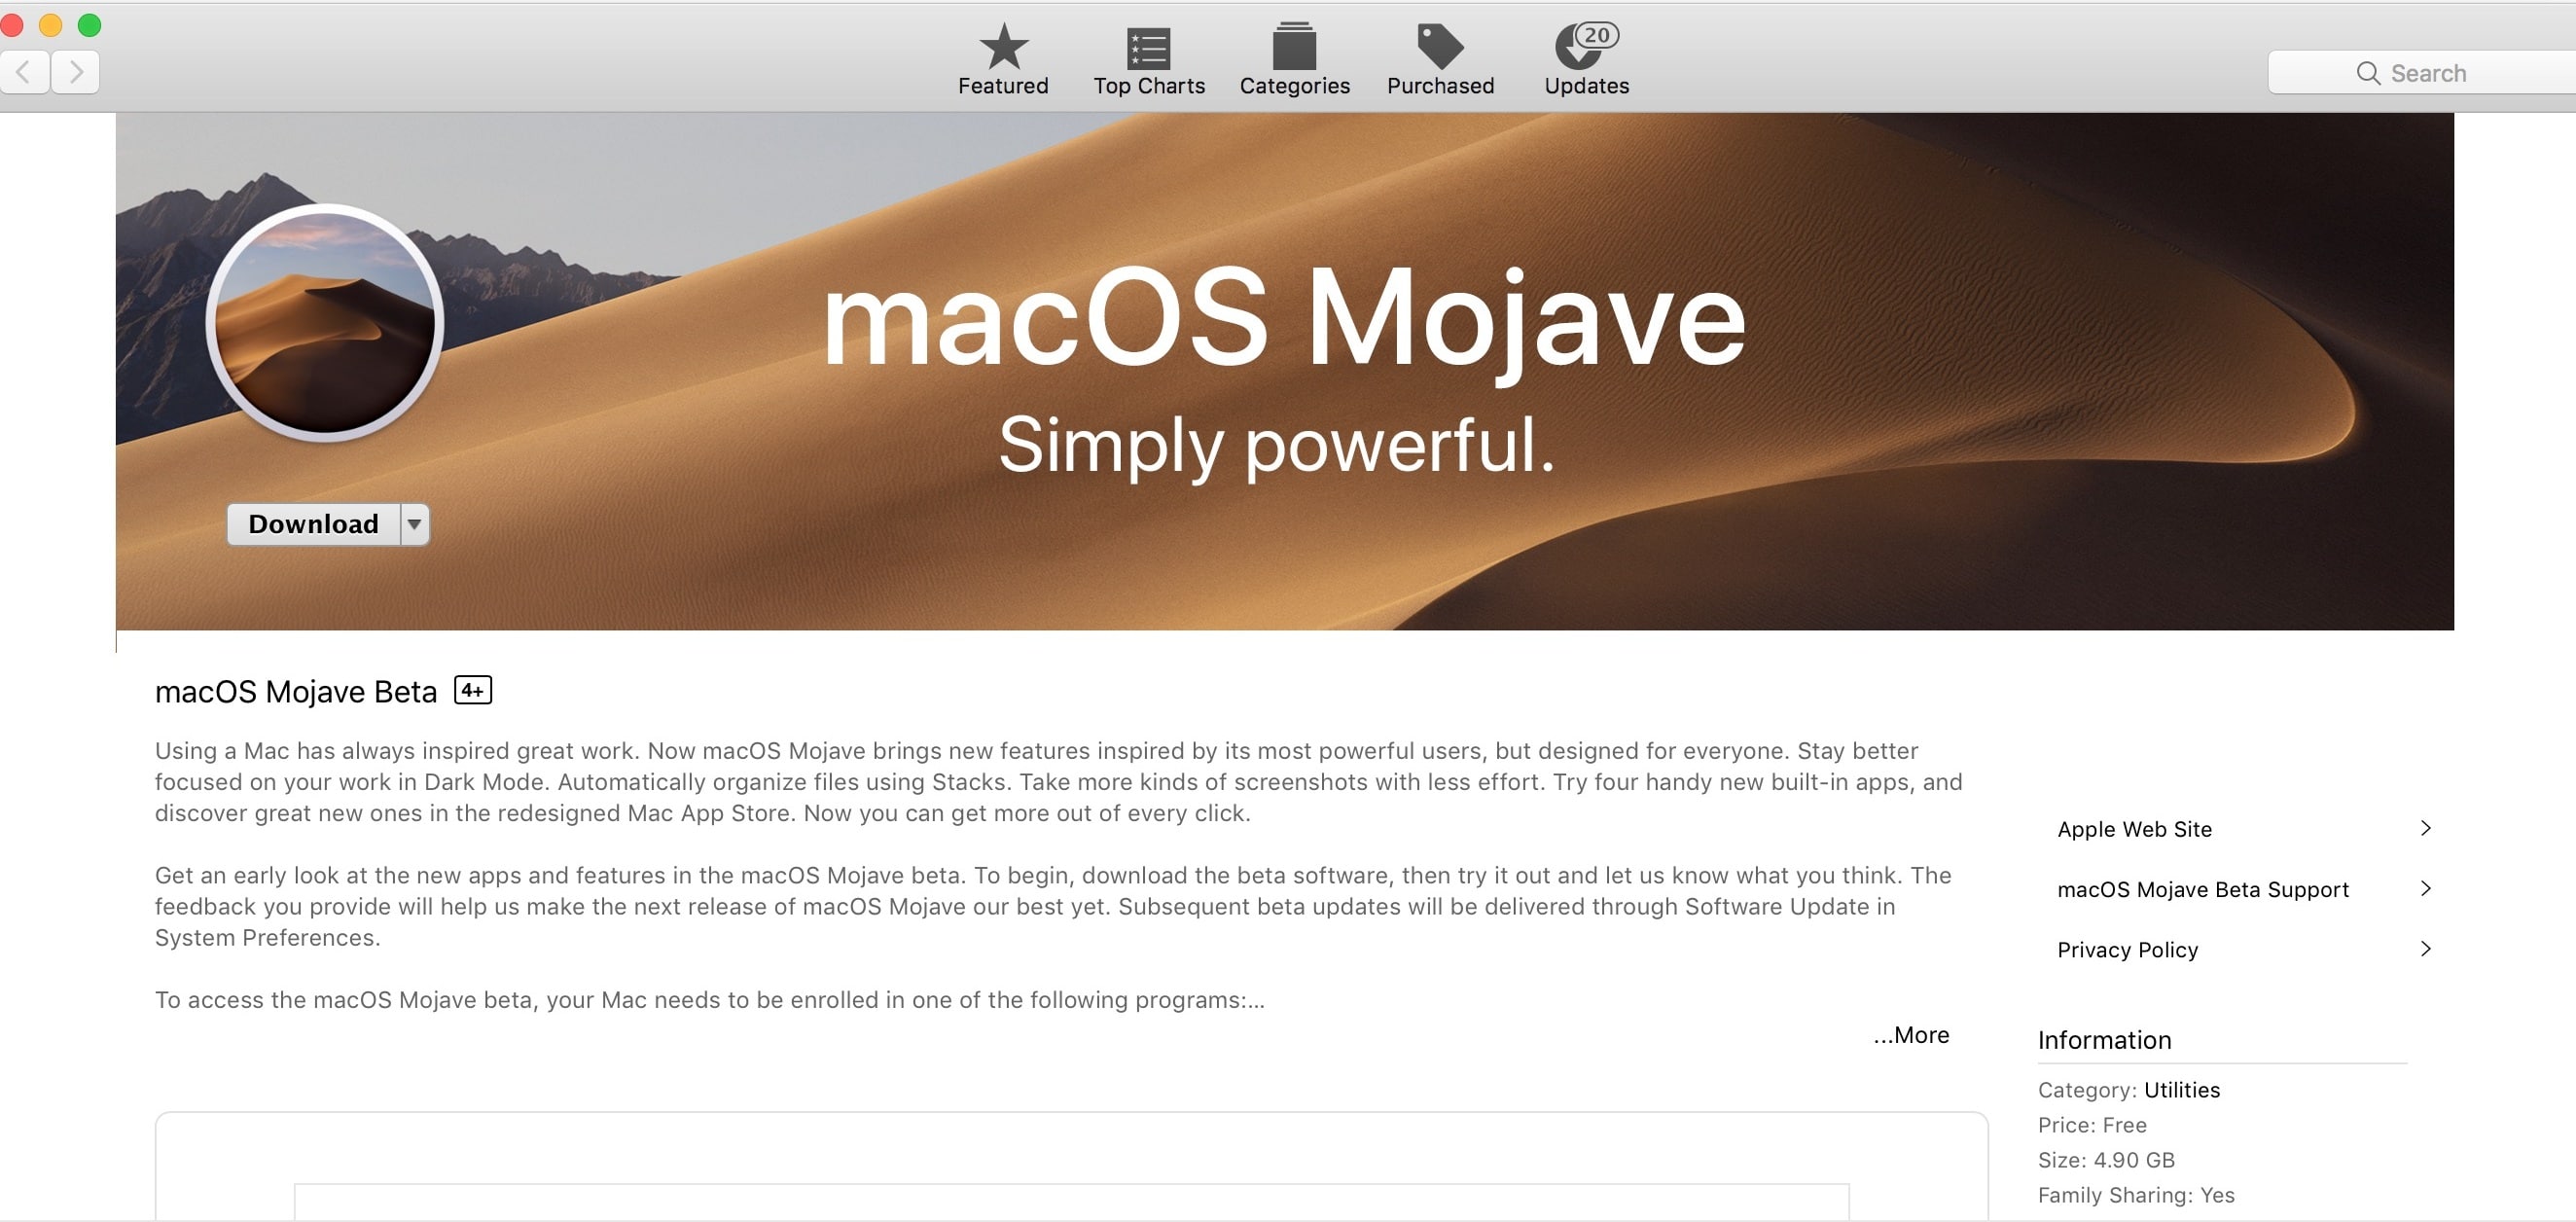 Download the macOS Mojave